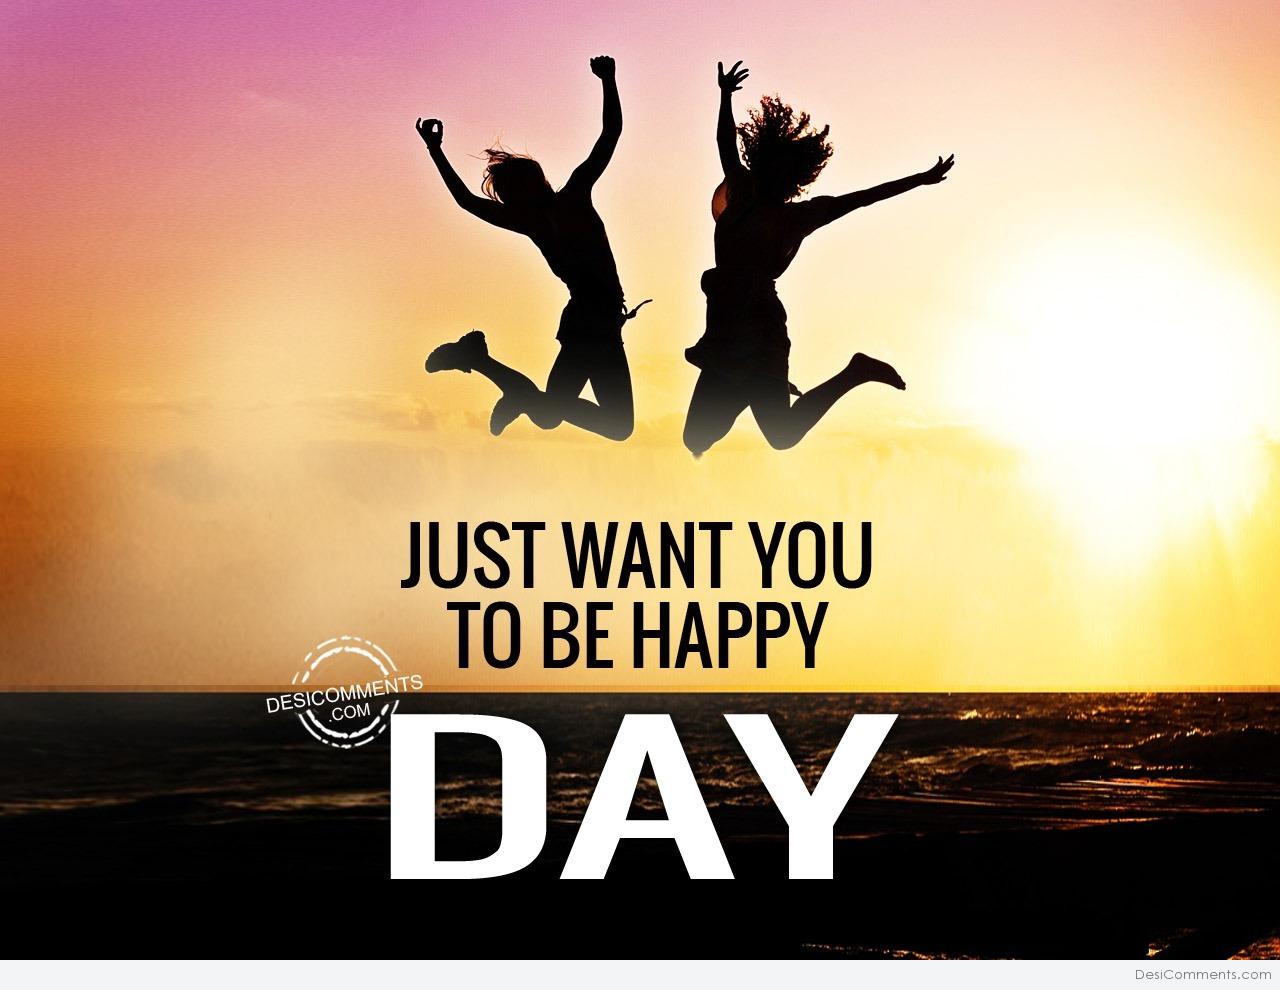 I Want You To Be Happy Day Pictures, Images, Graphics for Facebook ...